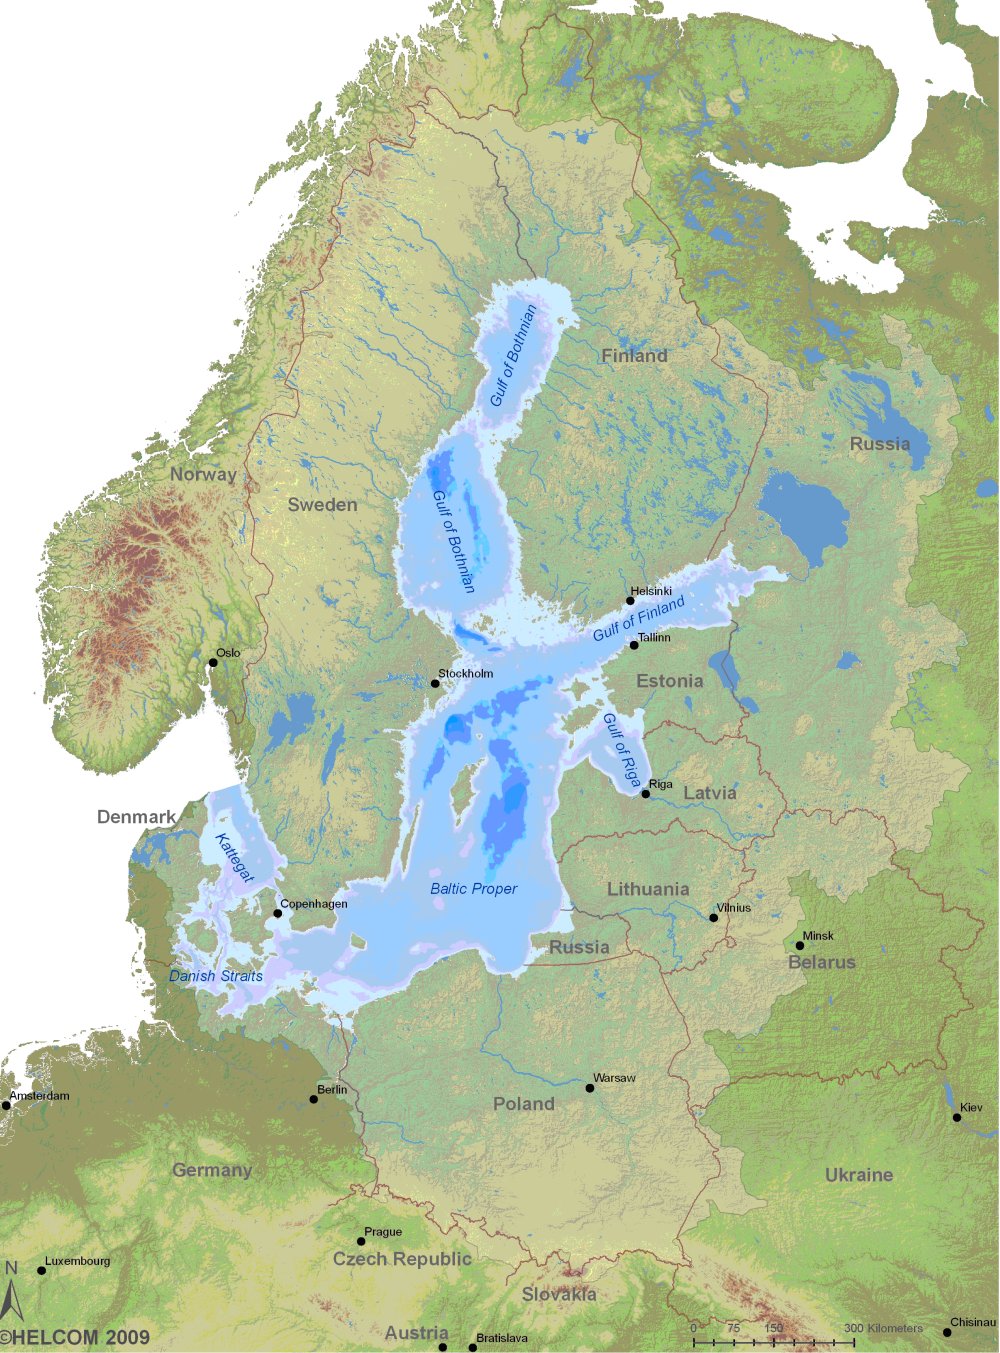 Figure 1: Map of the Baltic Sea region; the light green area represents the catchment area of the Baltic Sea